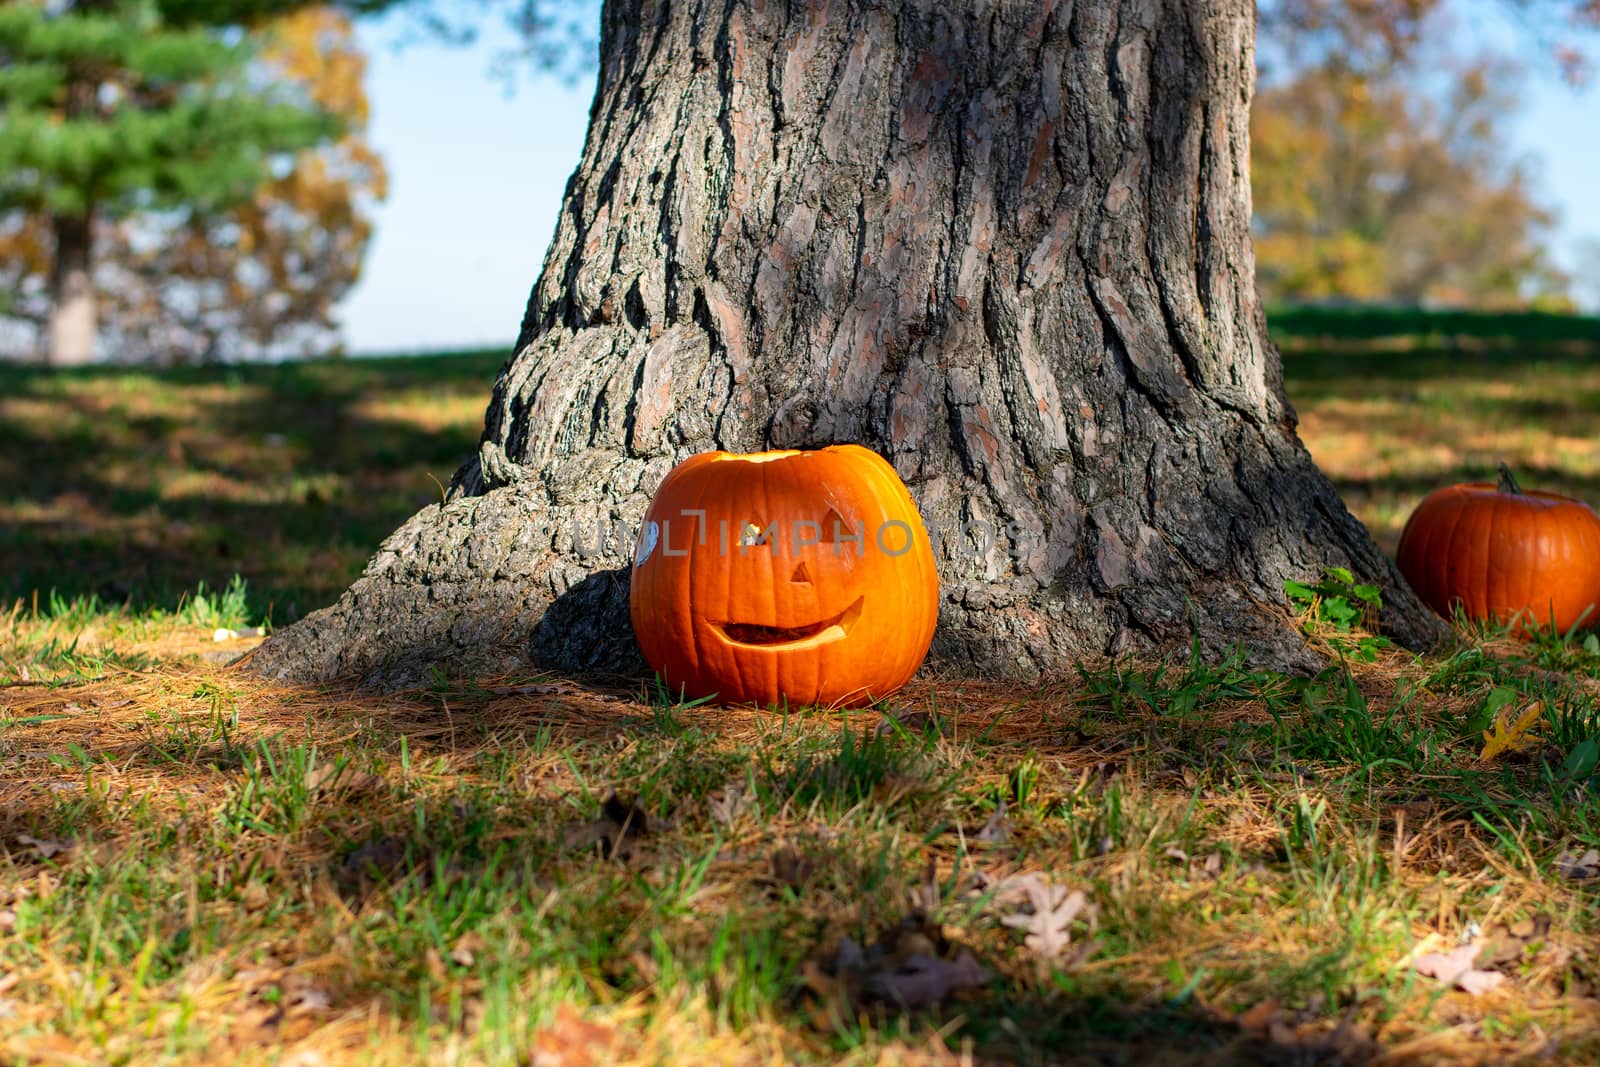 A Crudely Carved Pumpkin In Front of a Tree at a Park by bju12290